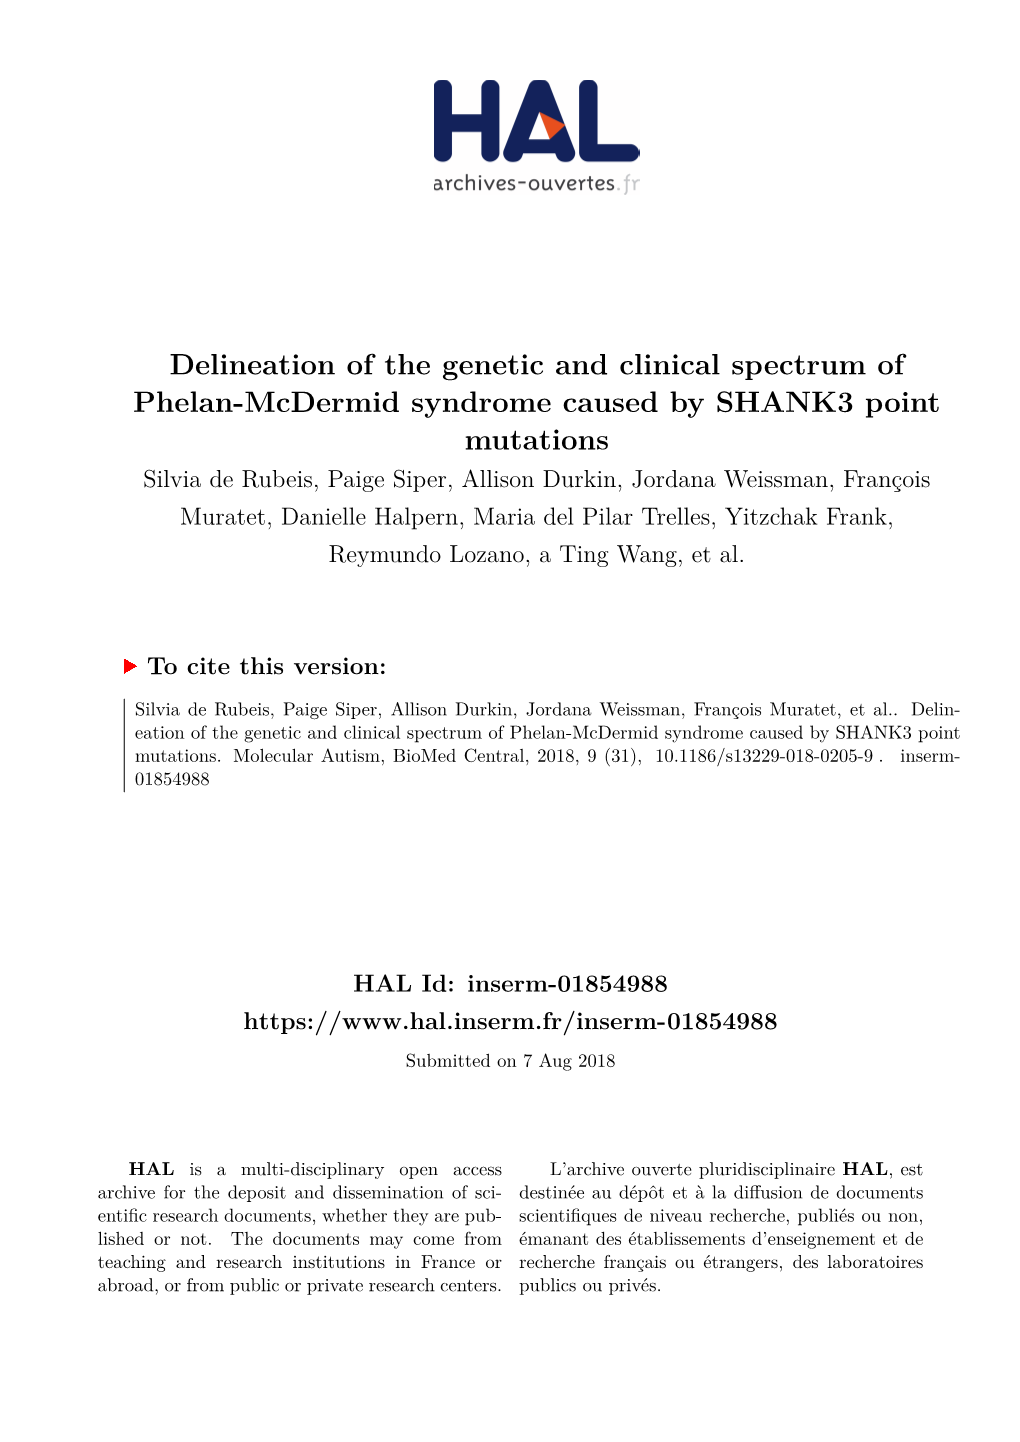 Delineation of the Genetic and Clinical Spectrum of Phelan